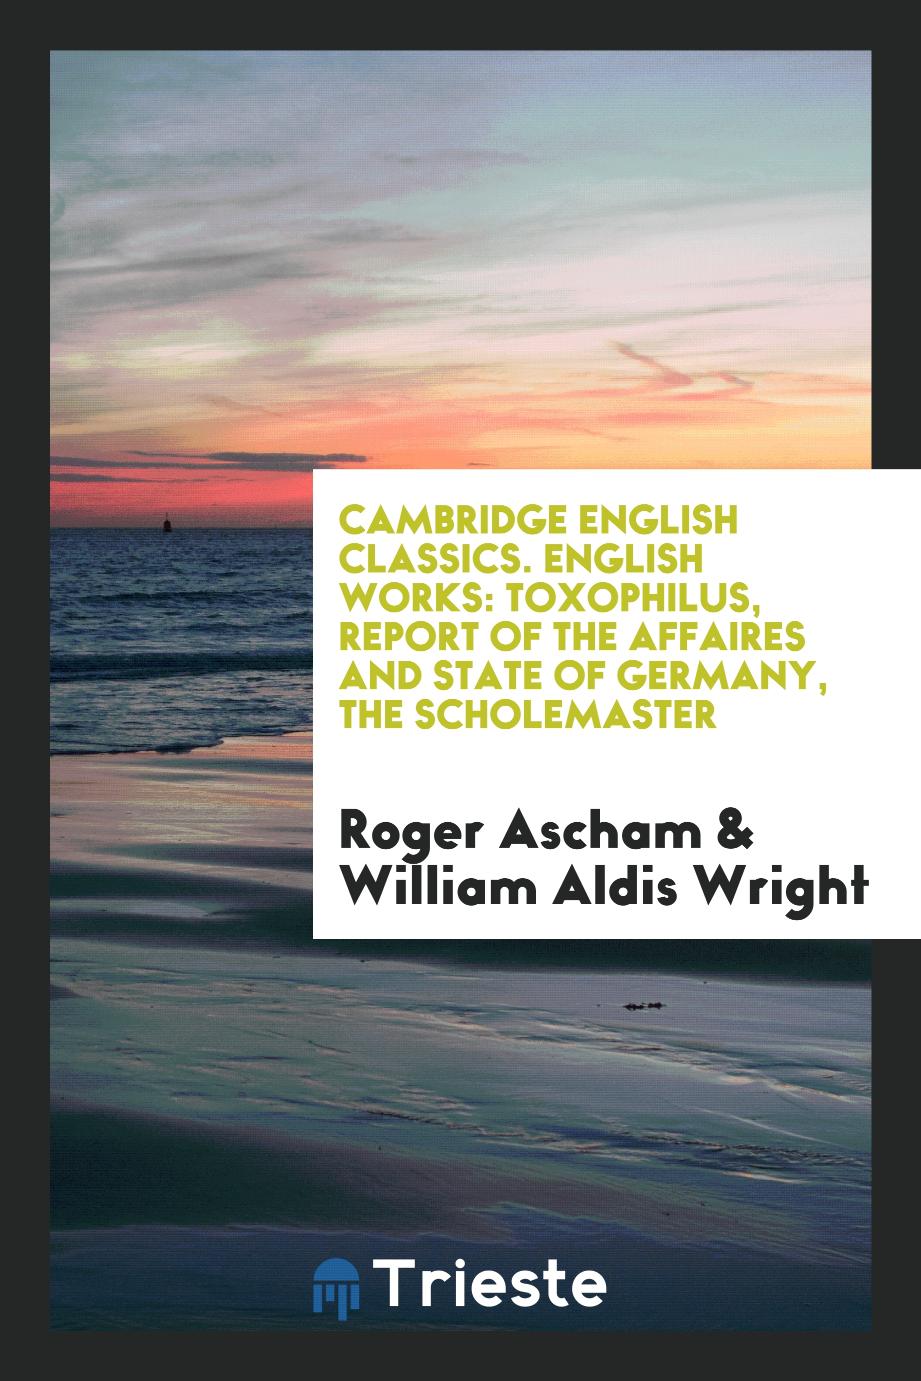 Cambridge English Classics. English Works: Toxophilus, Report of the Affaires and State of Germany, the Scholemaster